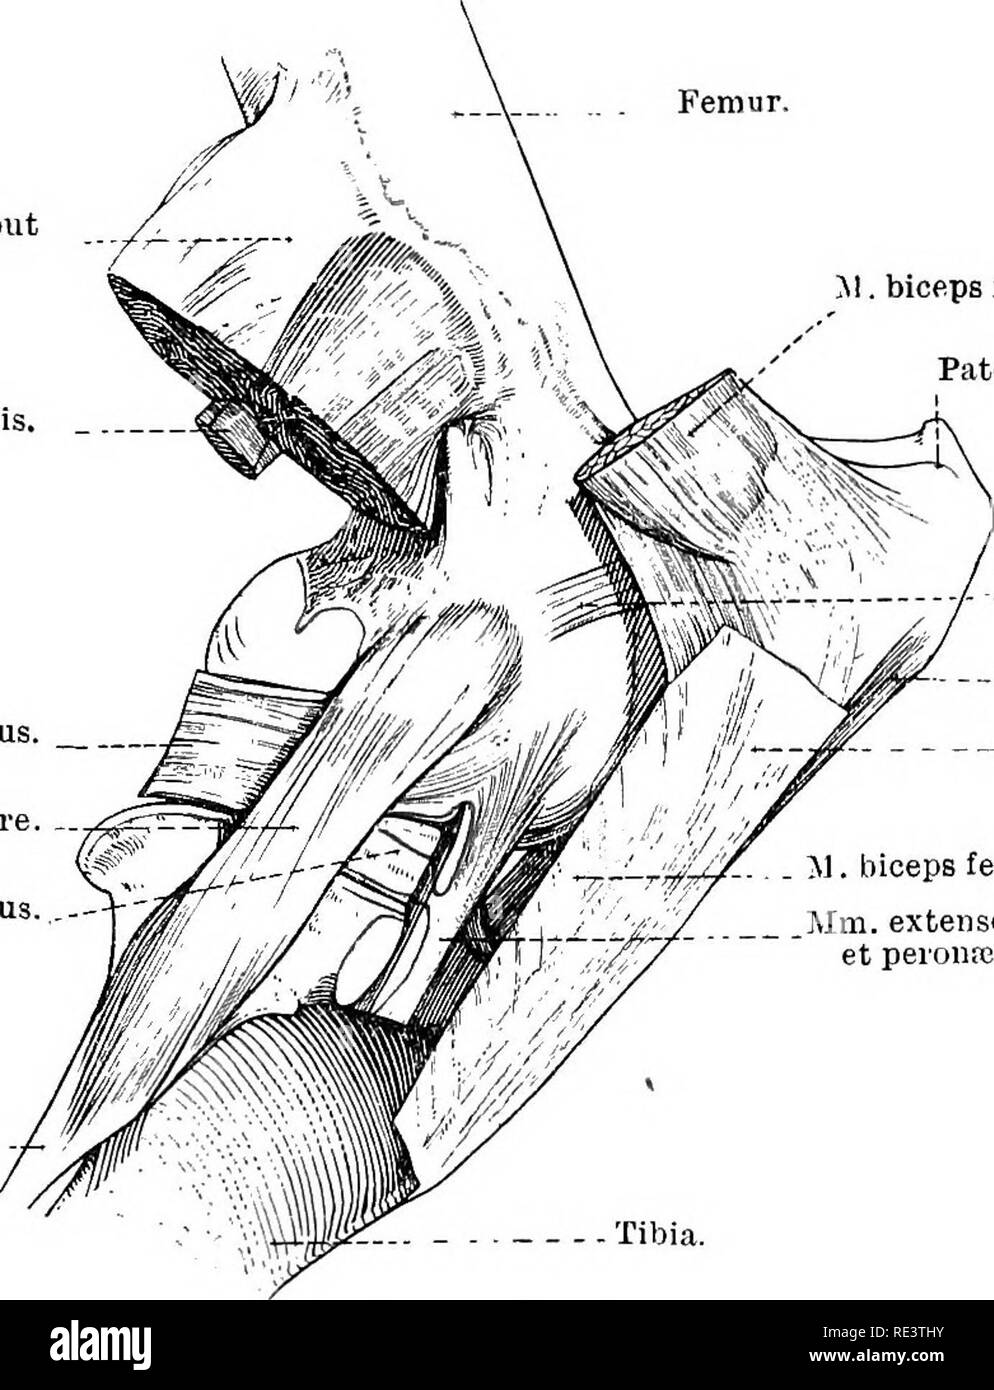 . The topographical anatomy of the limbs of the horse. Horses; Physiology. THE LIMBS OF THE HOKSE 155 The three, slightly converging, patellar ligaments (ligamenta patellae) correspond to the single ligament of man and the dog. The lateral and middle ligaments spring from the lateral and distal angles respectively of the patella. The medial ligament is connected with the patellar supplementary cartilage. The distal attachment of each band is to the tuberosity of the tibia, the middle ligament being fixed to the distal part of the groove-like depression of the tuberosity. TThe lateral ligament  Stock Photo